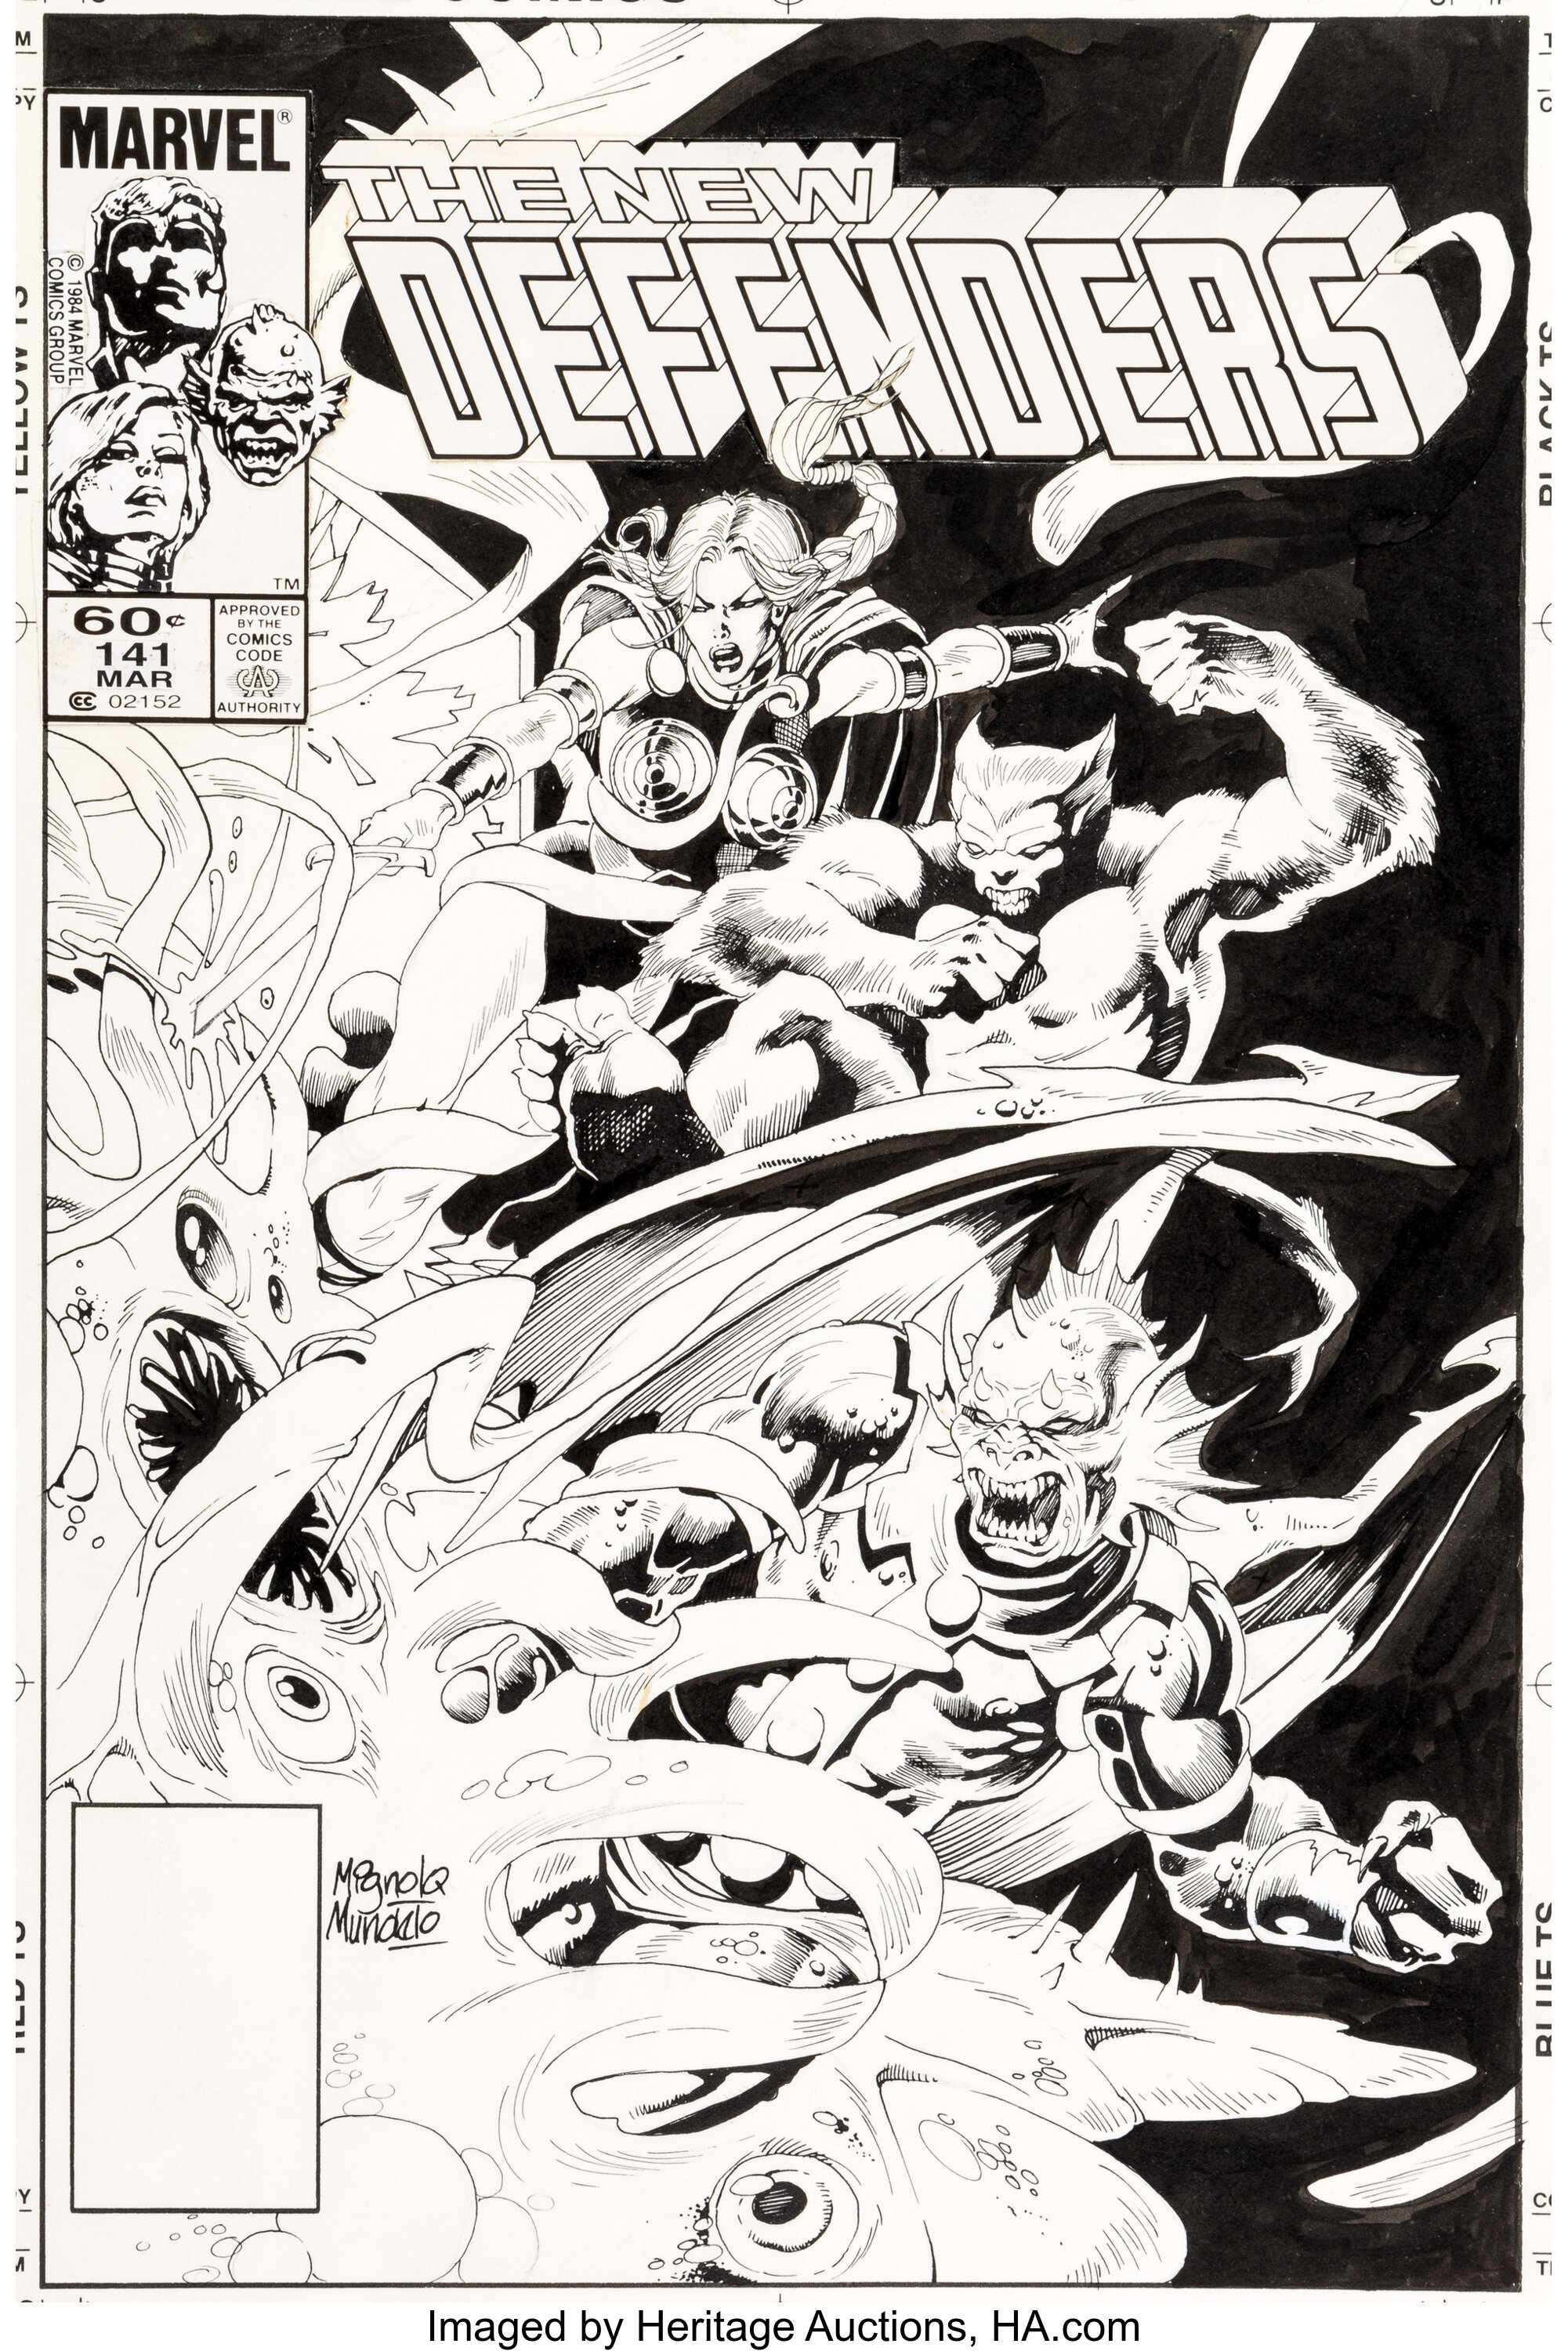 Mike Mignola And Kevin Nowlan As Mundelo Defenders 141 Cover Lot 92173 Heritage Auctions